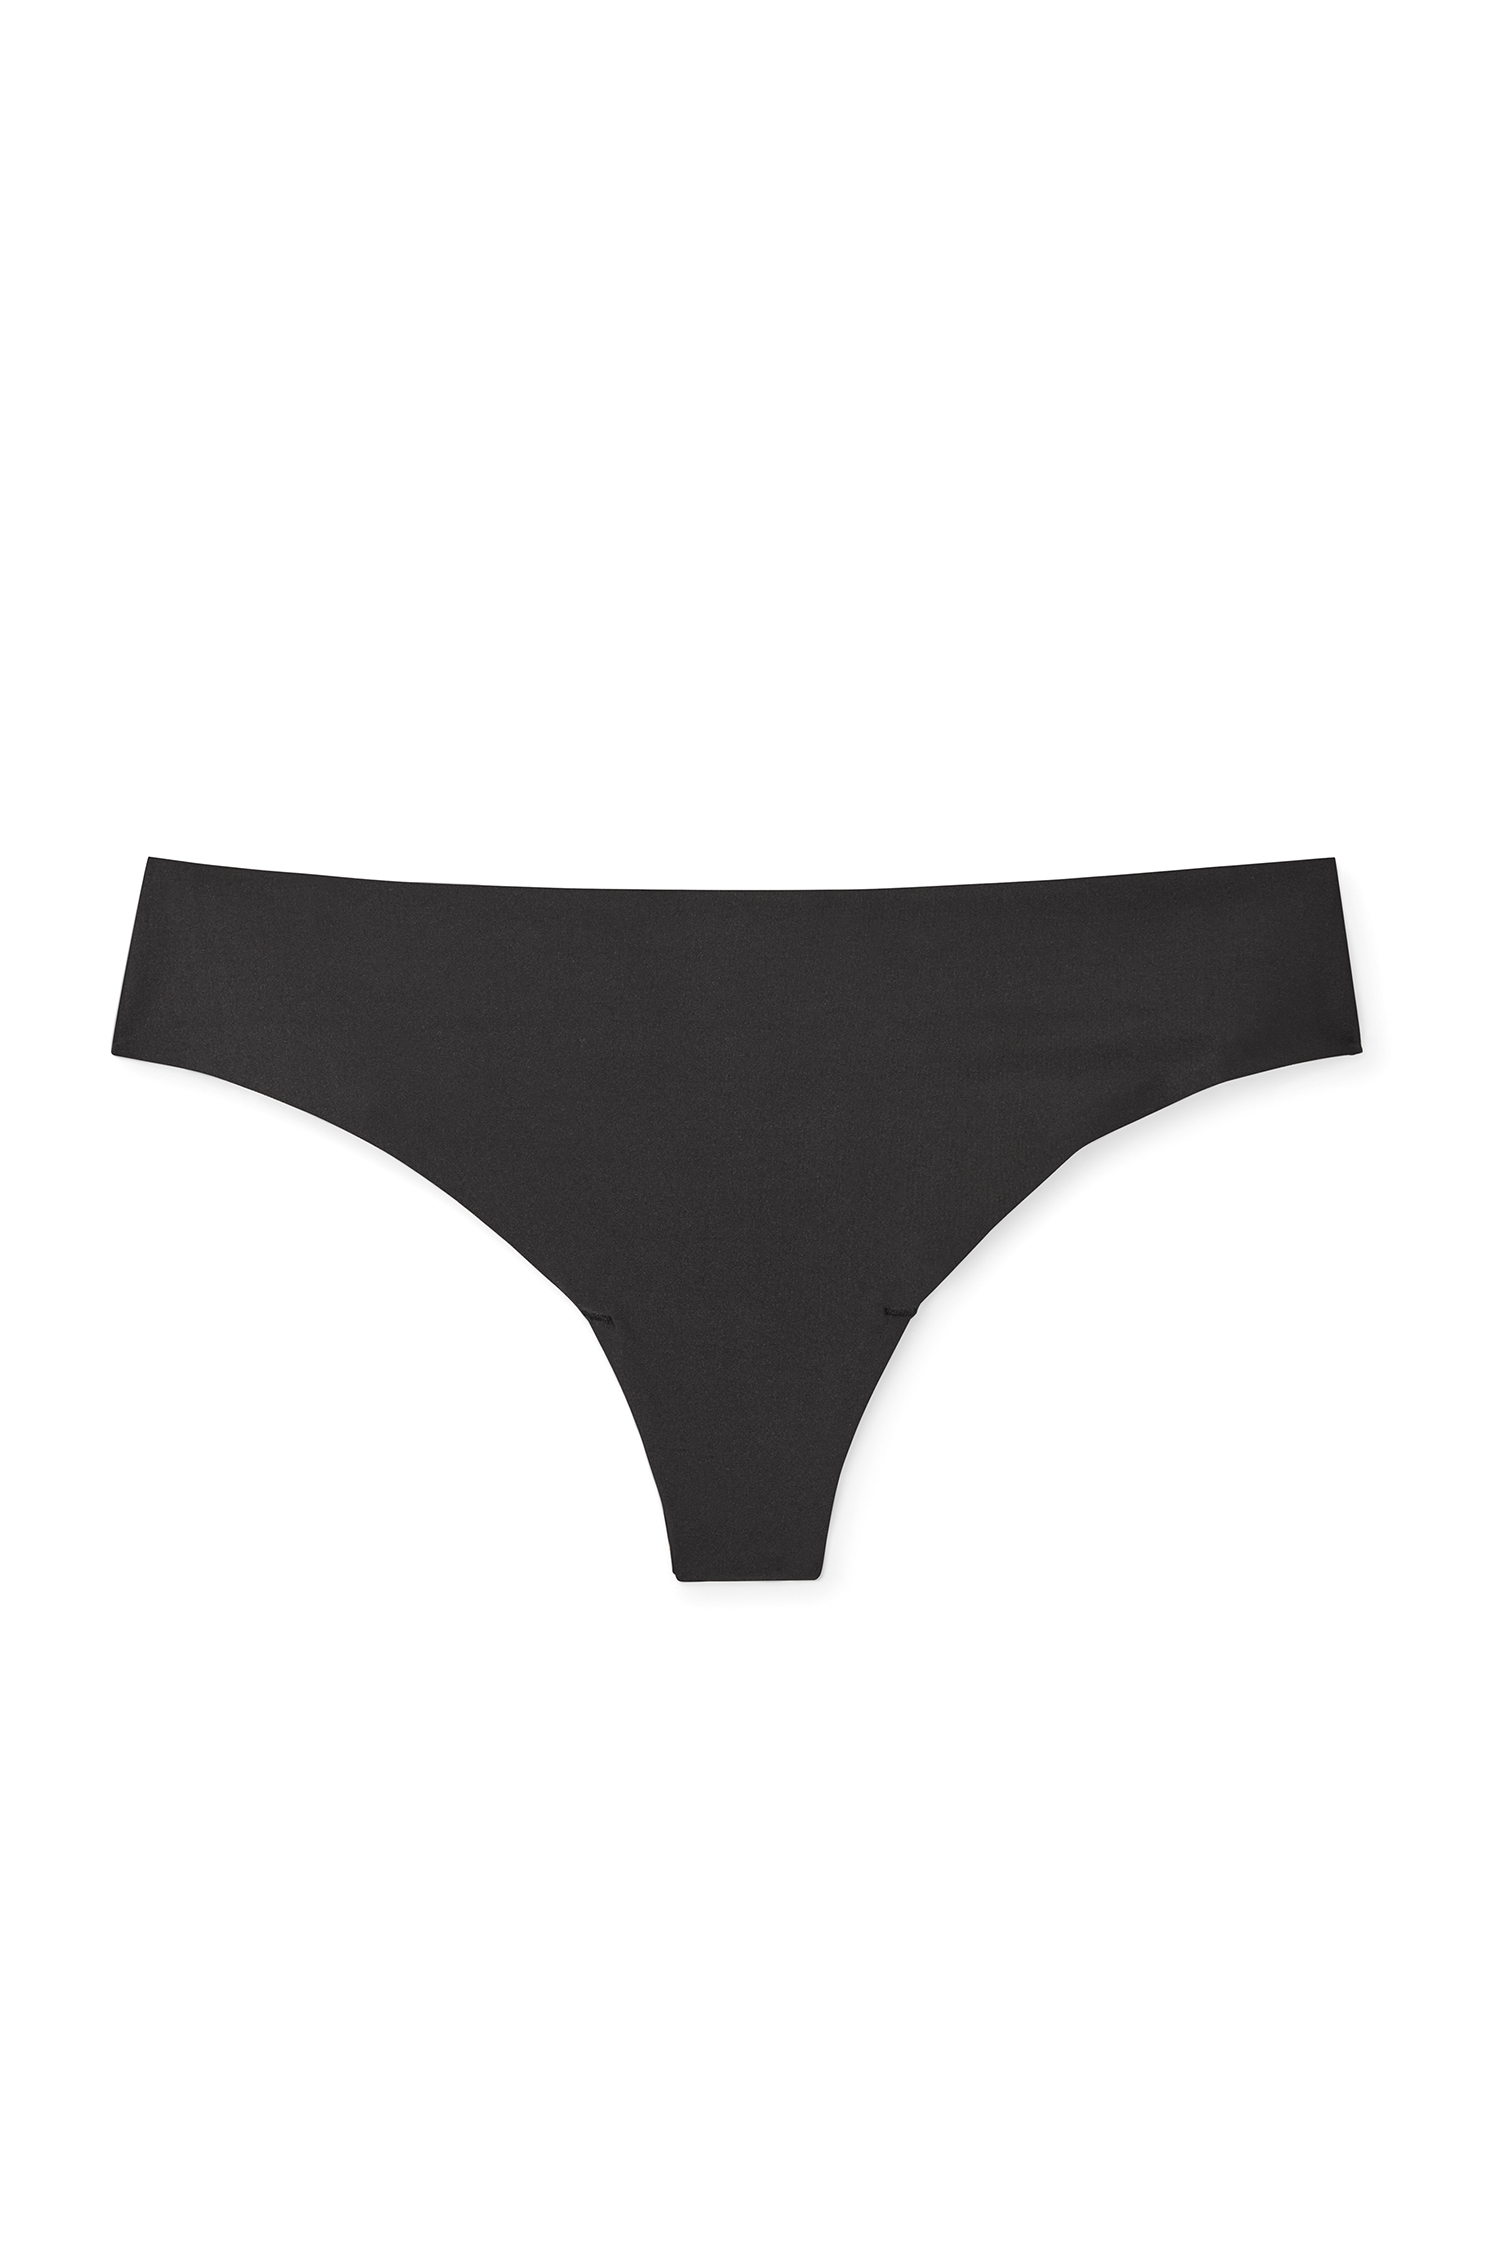 Annie Invisible Pack Thong Black Plus Thong Panties (Pack of 3)